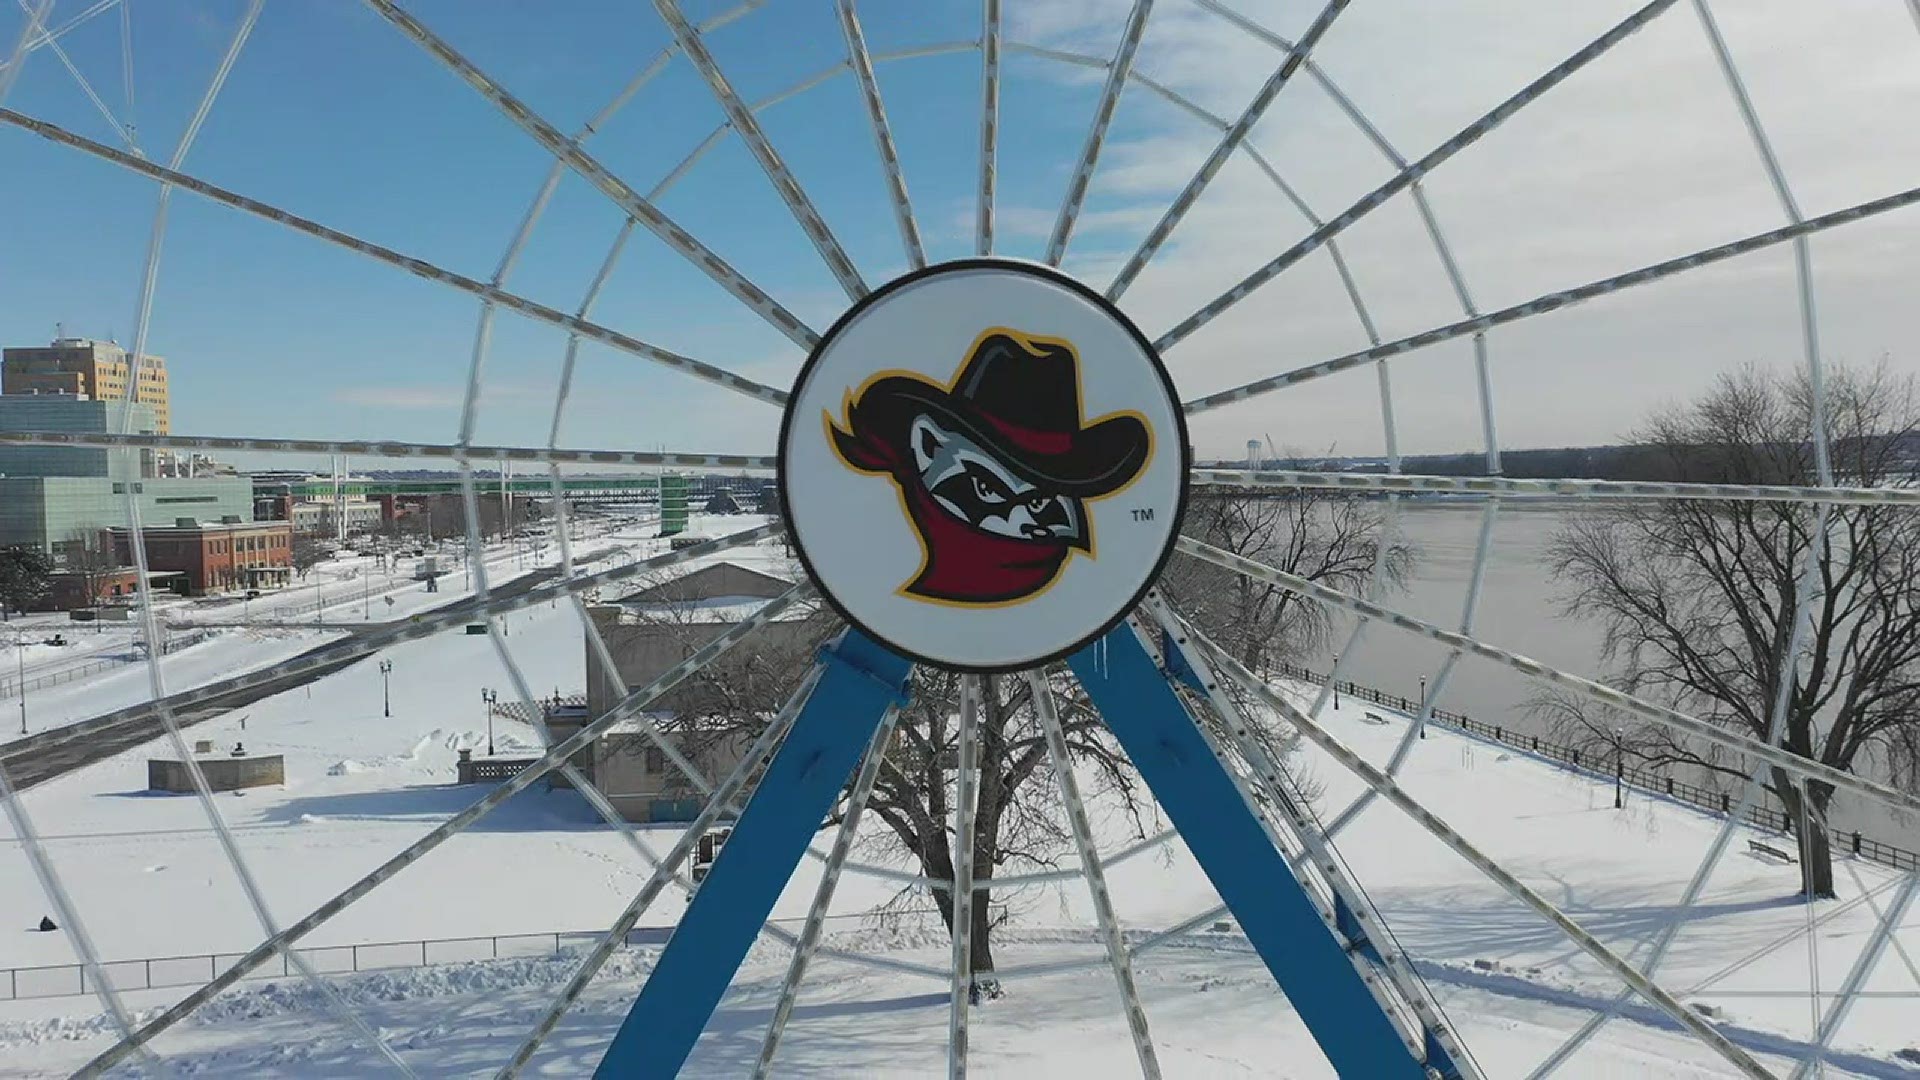 The boys of summer may be hibernating but the home of the Quad Cities River Bandits is waiting for them, and for the snow to melt eventually!